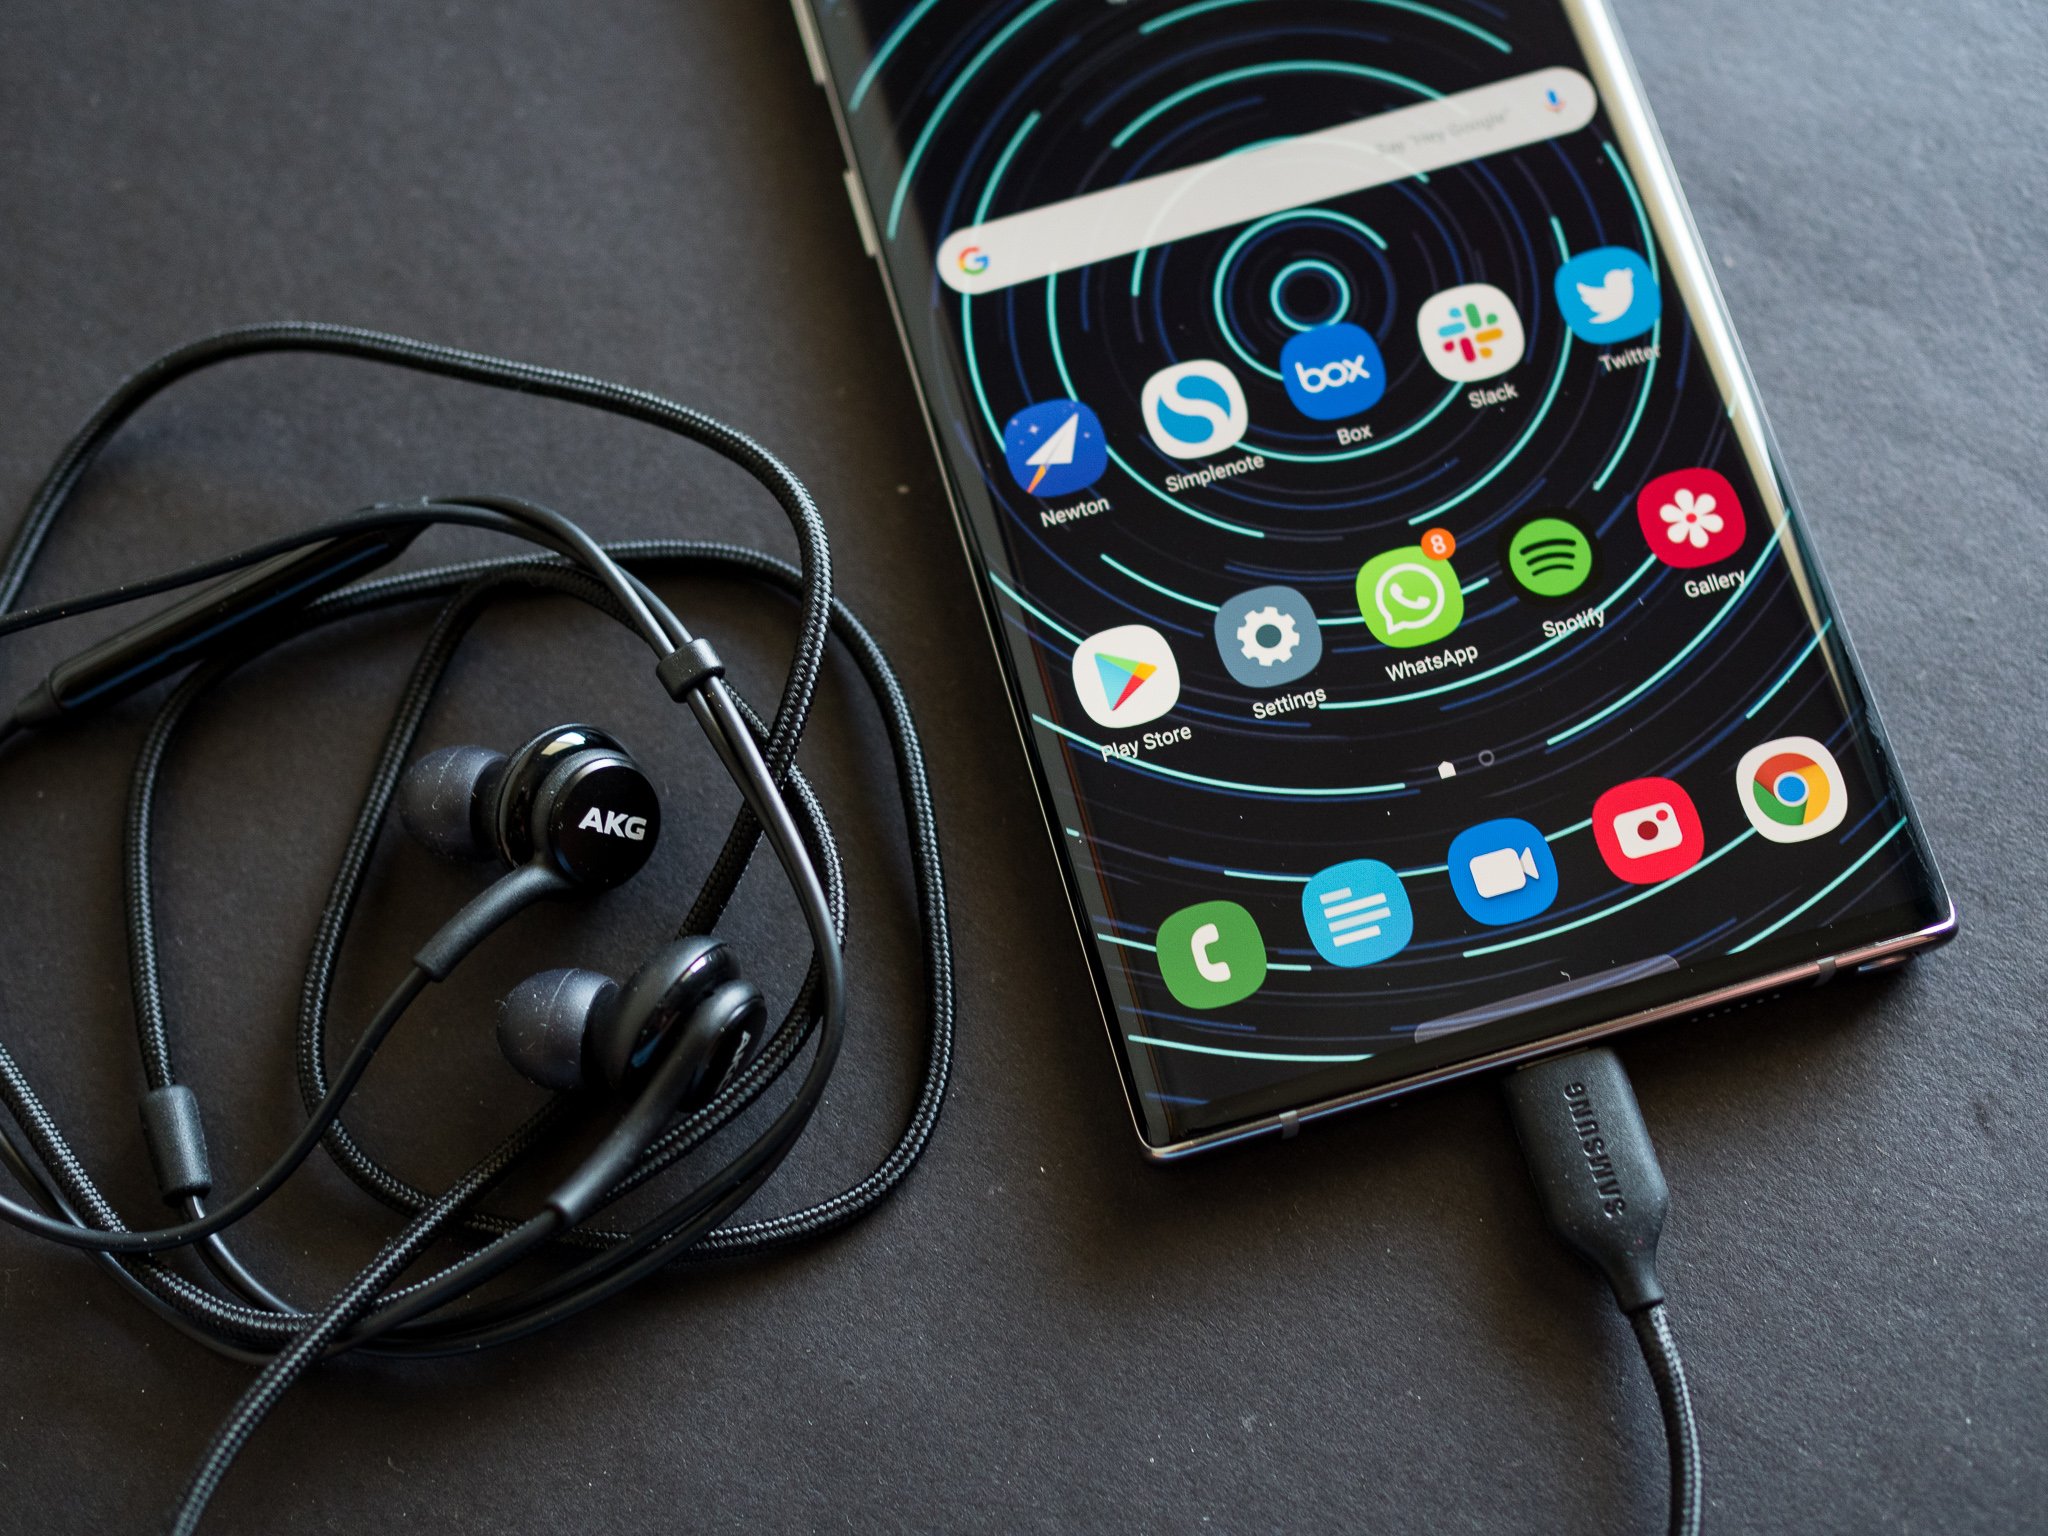 Samsung Galaxy Note 10+ with USB-C earbuds plugged in